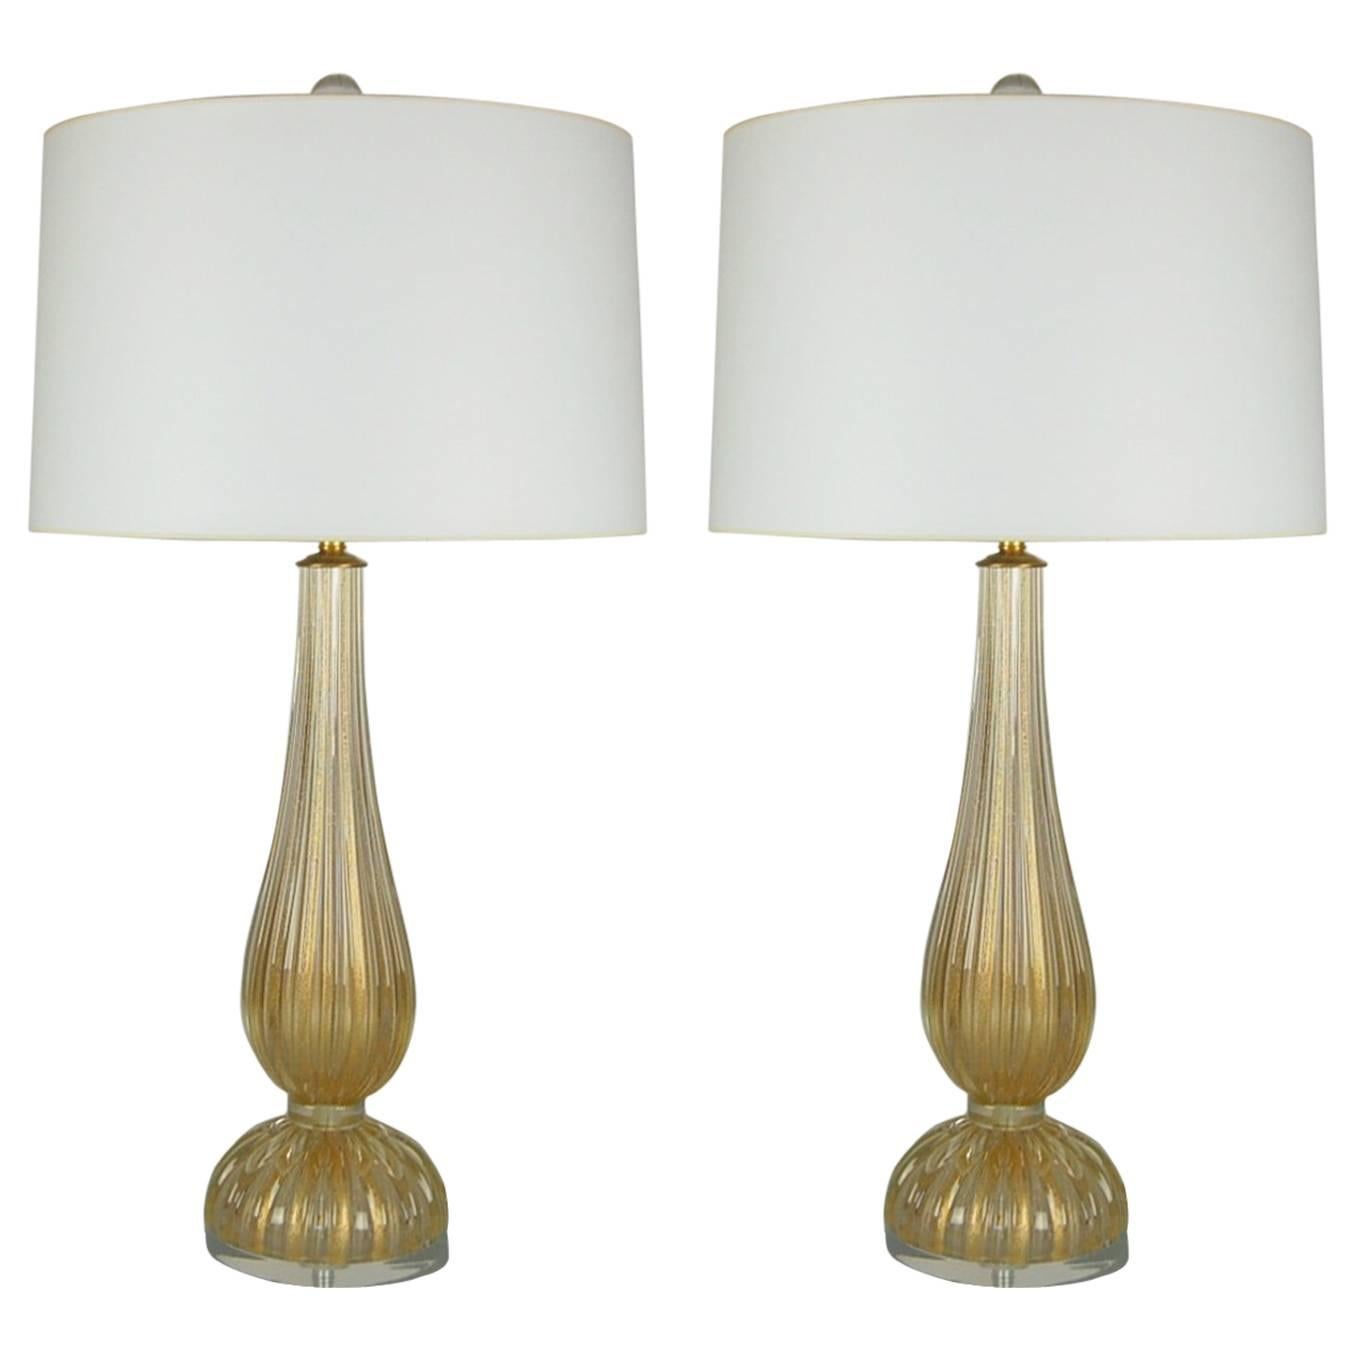 Matched Pair of Murano Table Lamps in Champagne Gold For Sale